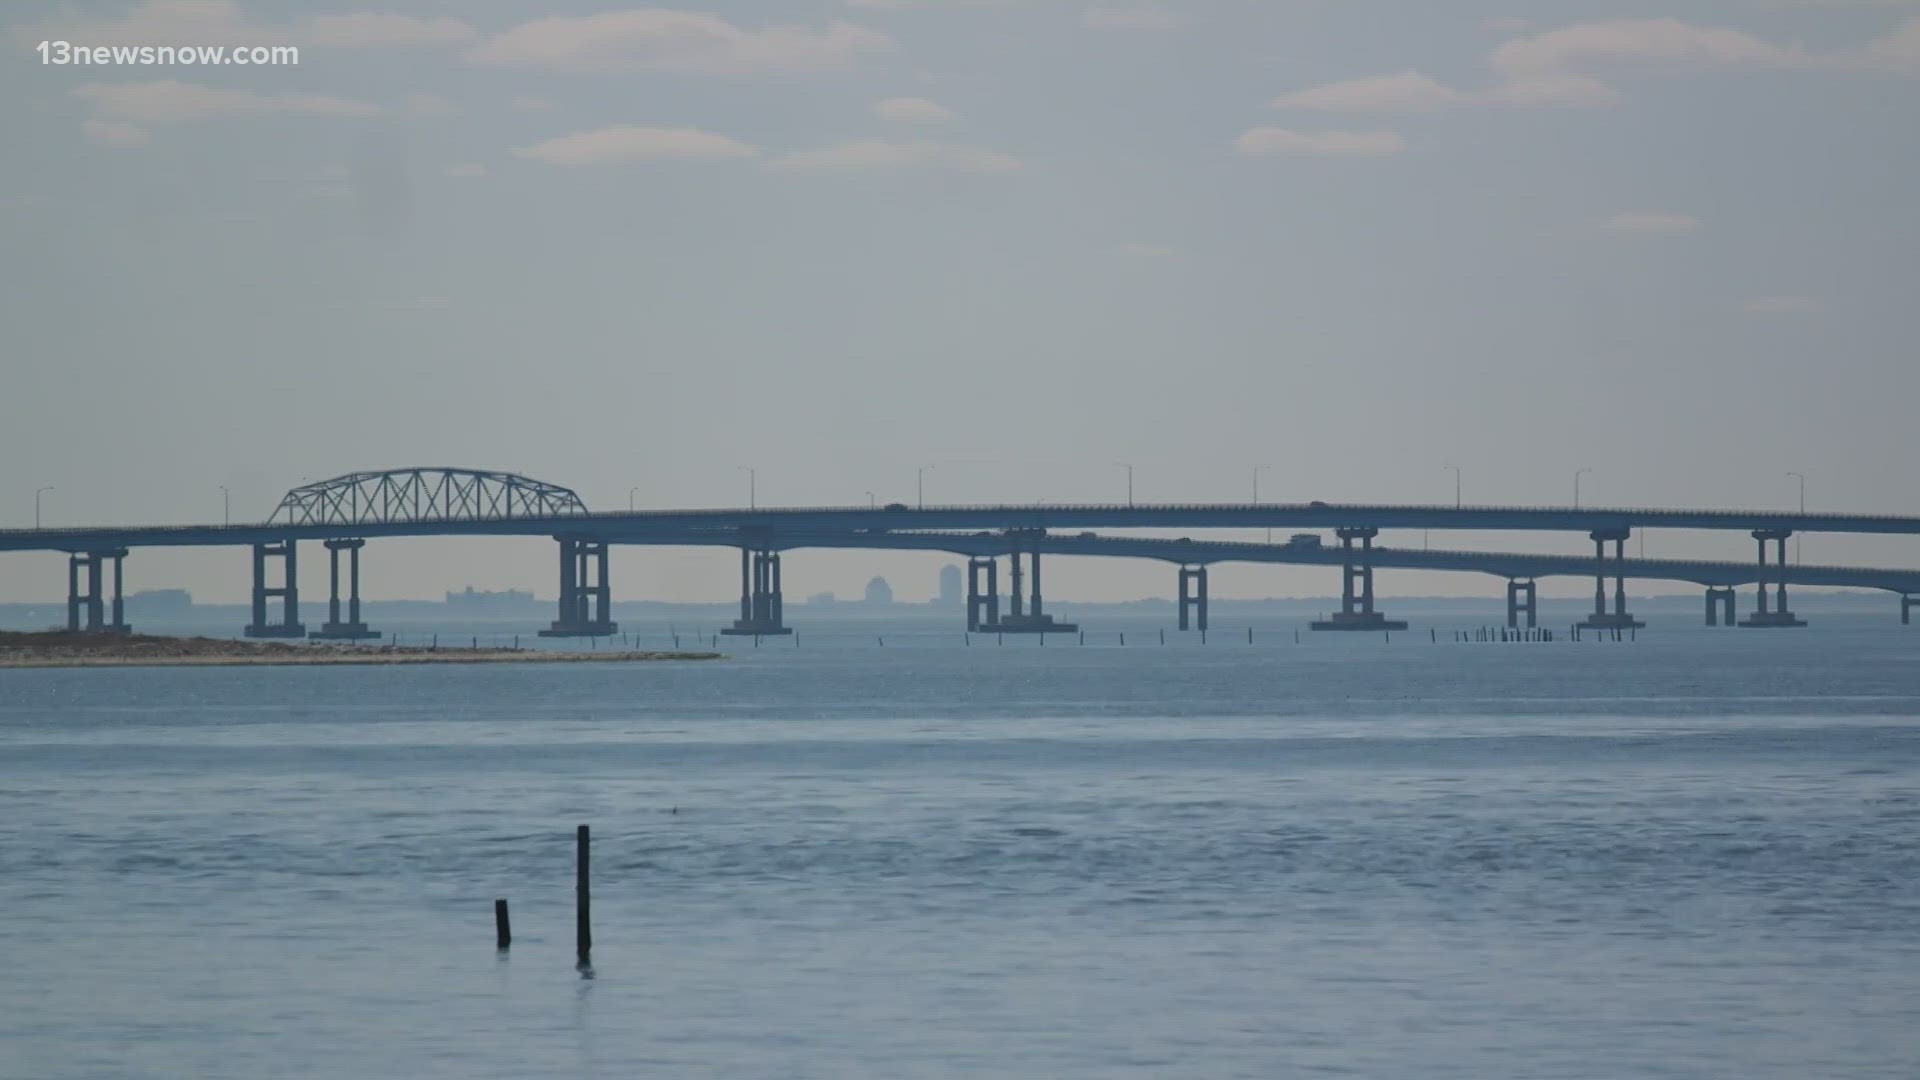 The Chesapeake bay bridge tunnel changed everything in 1964. Shore to shore... 17 miles of bridge and tunnel now gives us a quick ride to the shore.